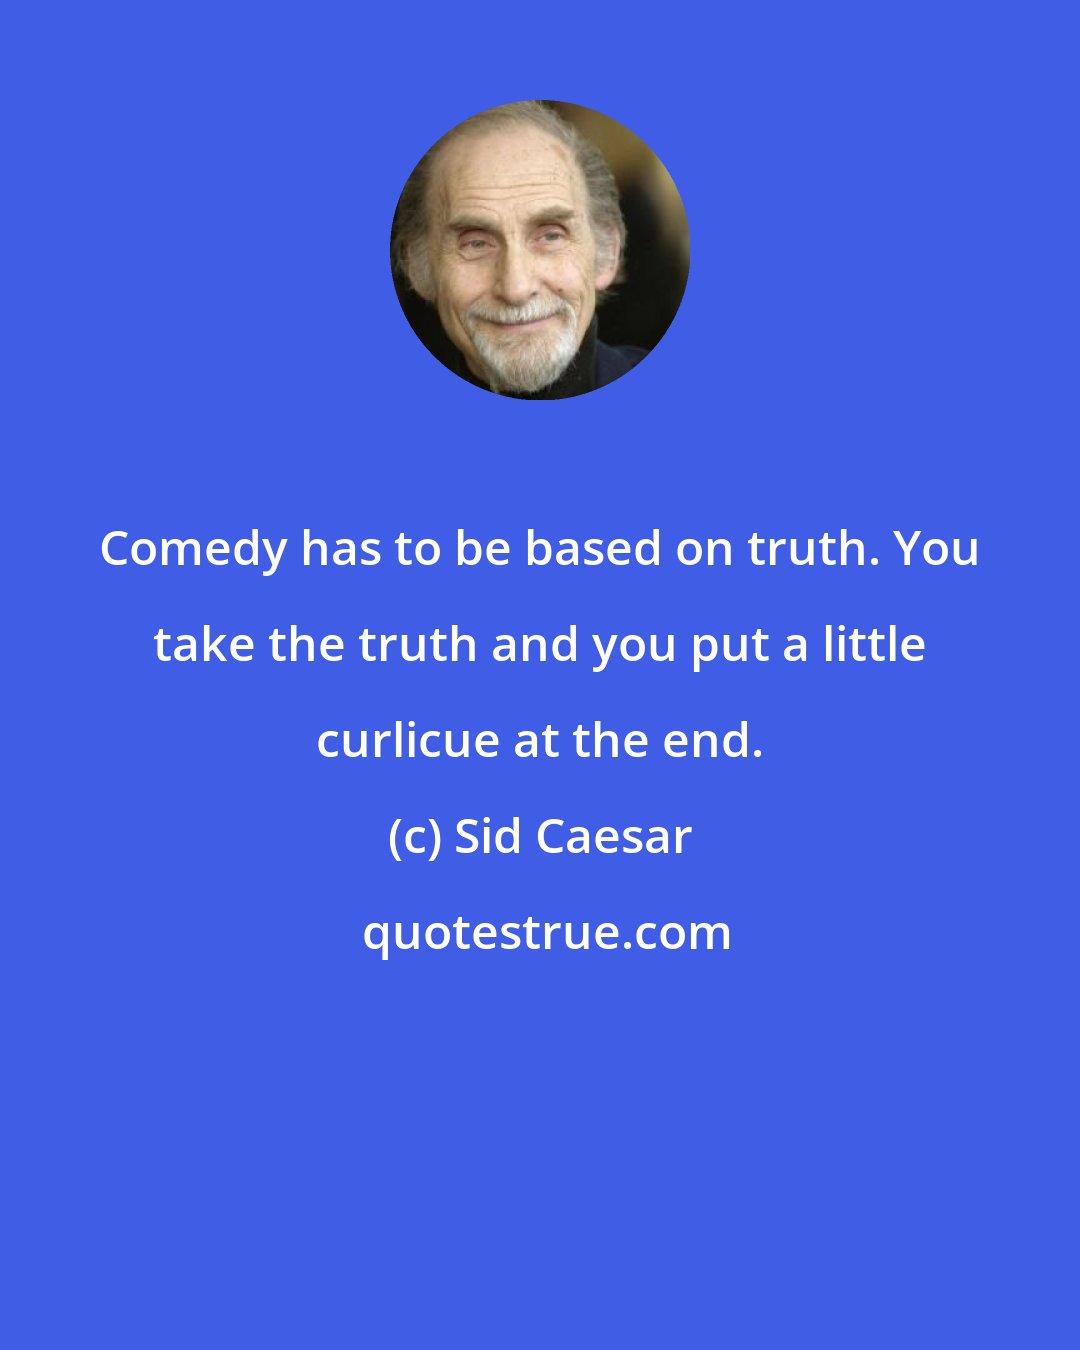 Sid Caesar: Comedy has to be based on truth. You take the truth and you put a little curlicue at the end.